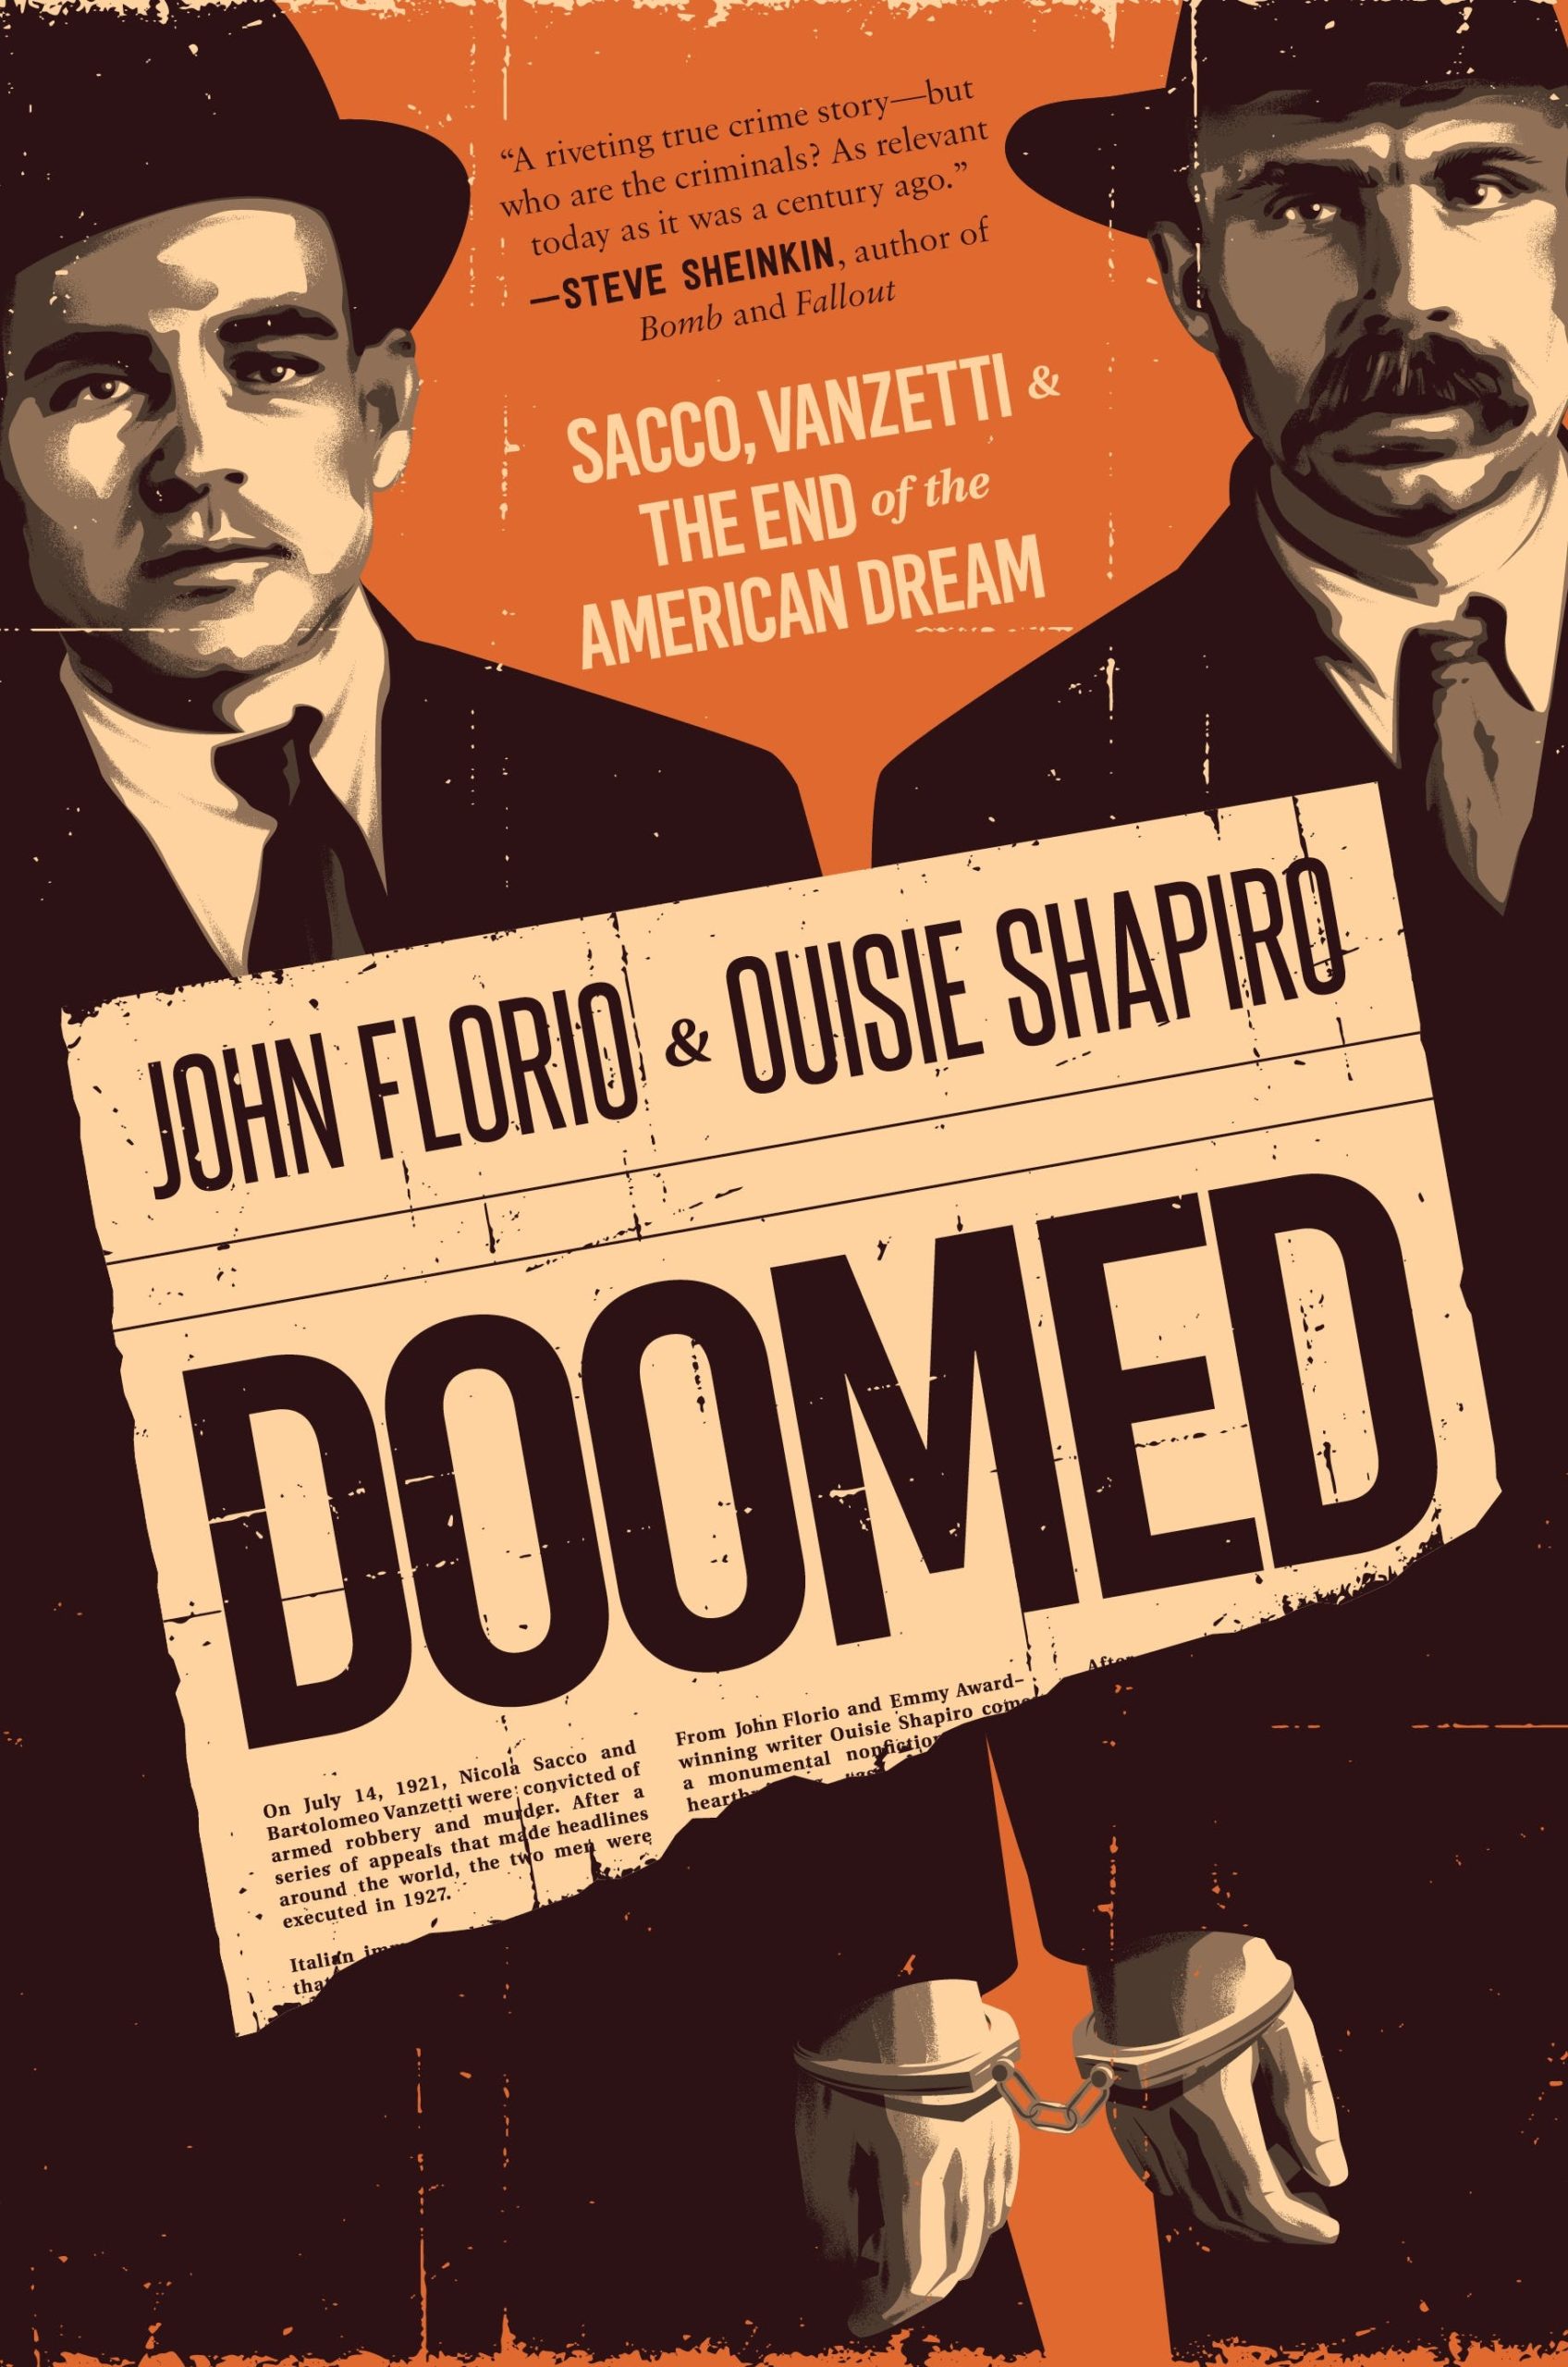 Doomed: Sacco and Vanzetti & the End of the American Dream by John Florio and Ouisie Shapiro